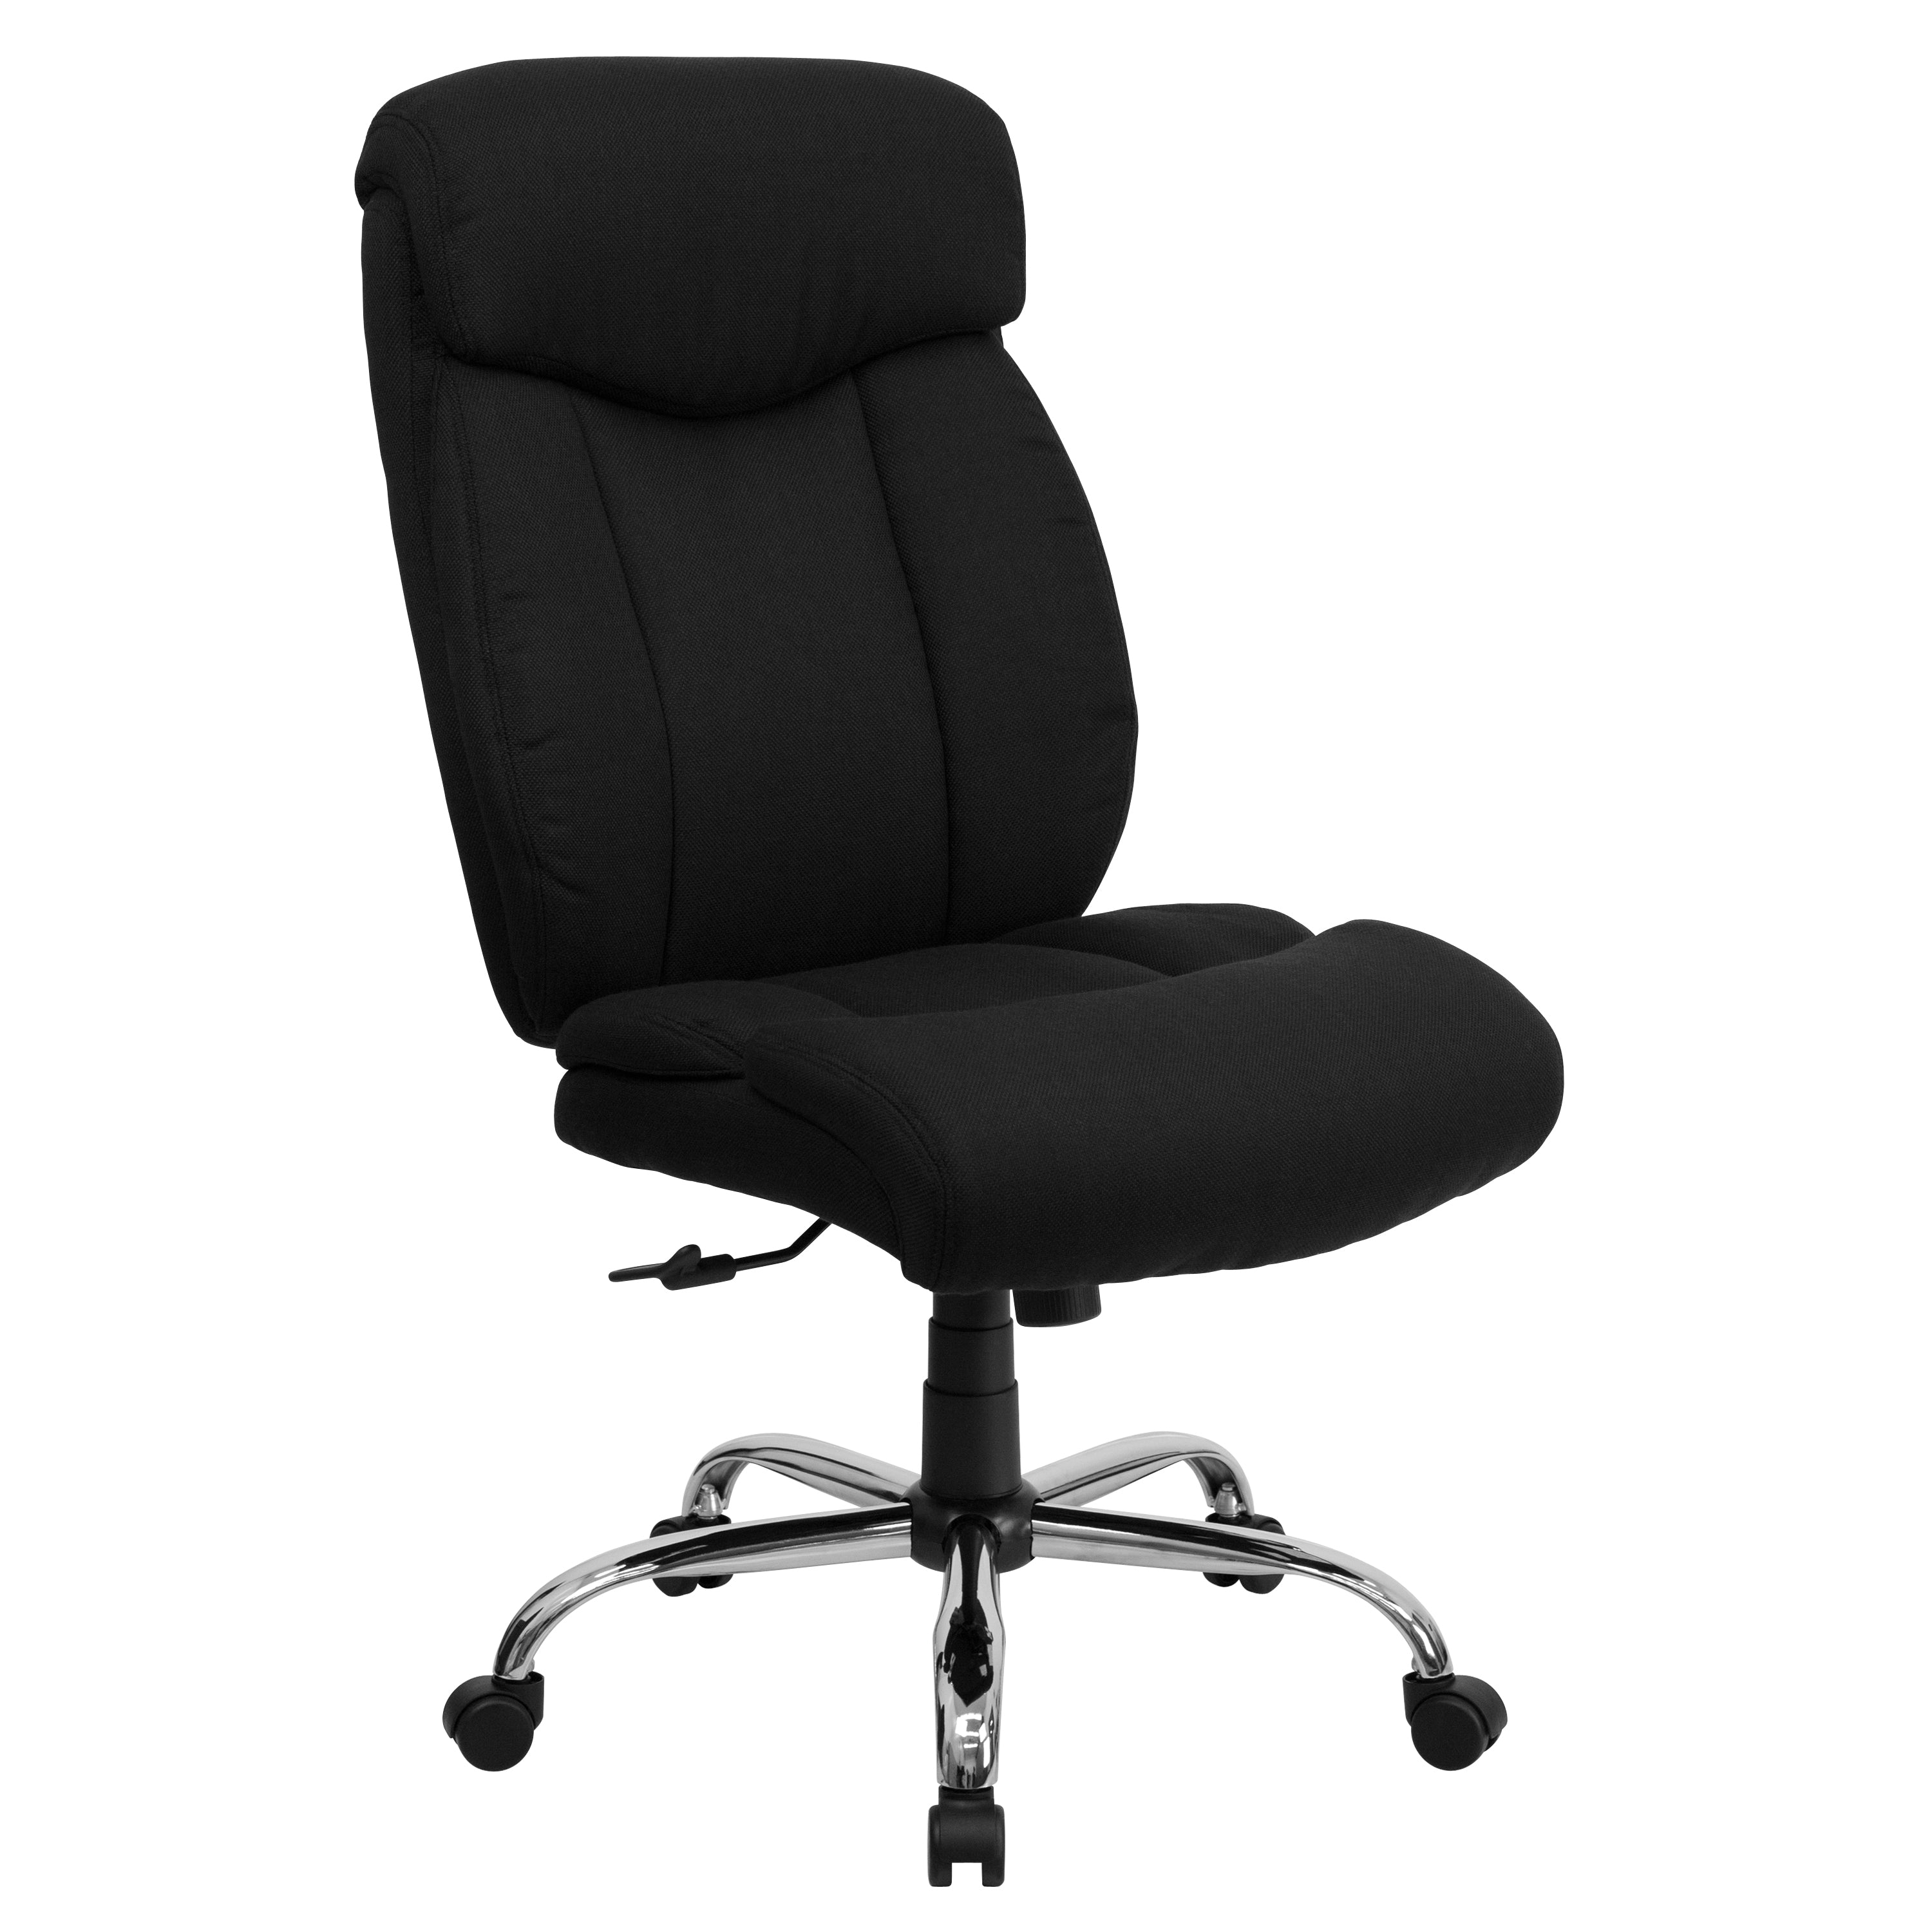 HERCULES Series Big & Tall 400 lb. Rated High Back Executive Swivel Ergonomic Office Chair with Full Headrest and Chrome Base-Big & Tall Office Chair-Flash Furniture-Wall2Wall Furnishings